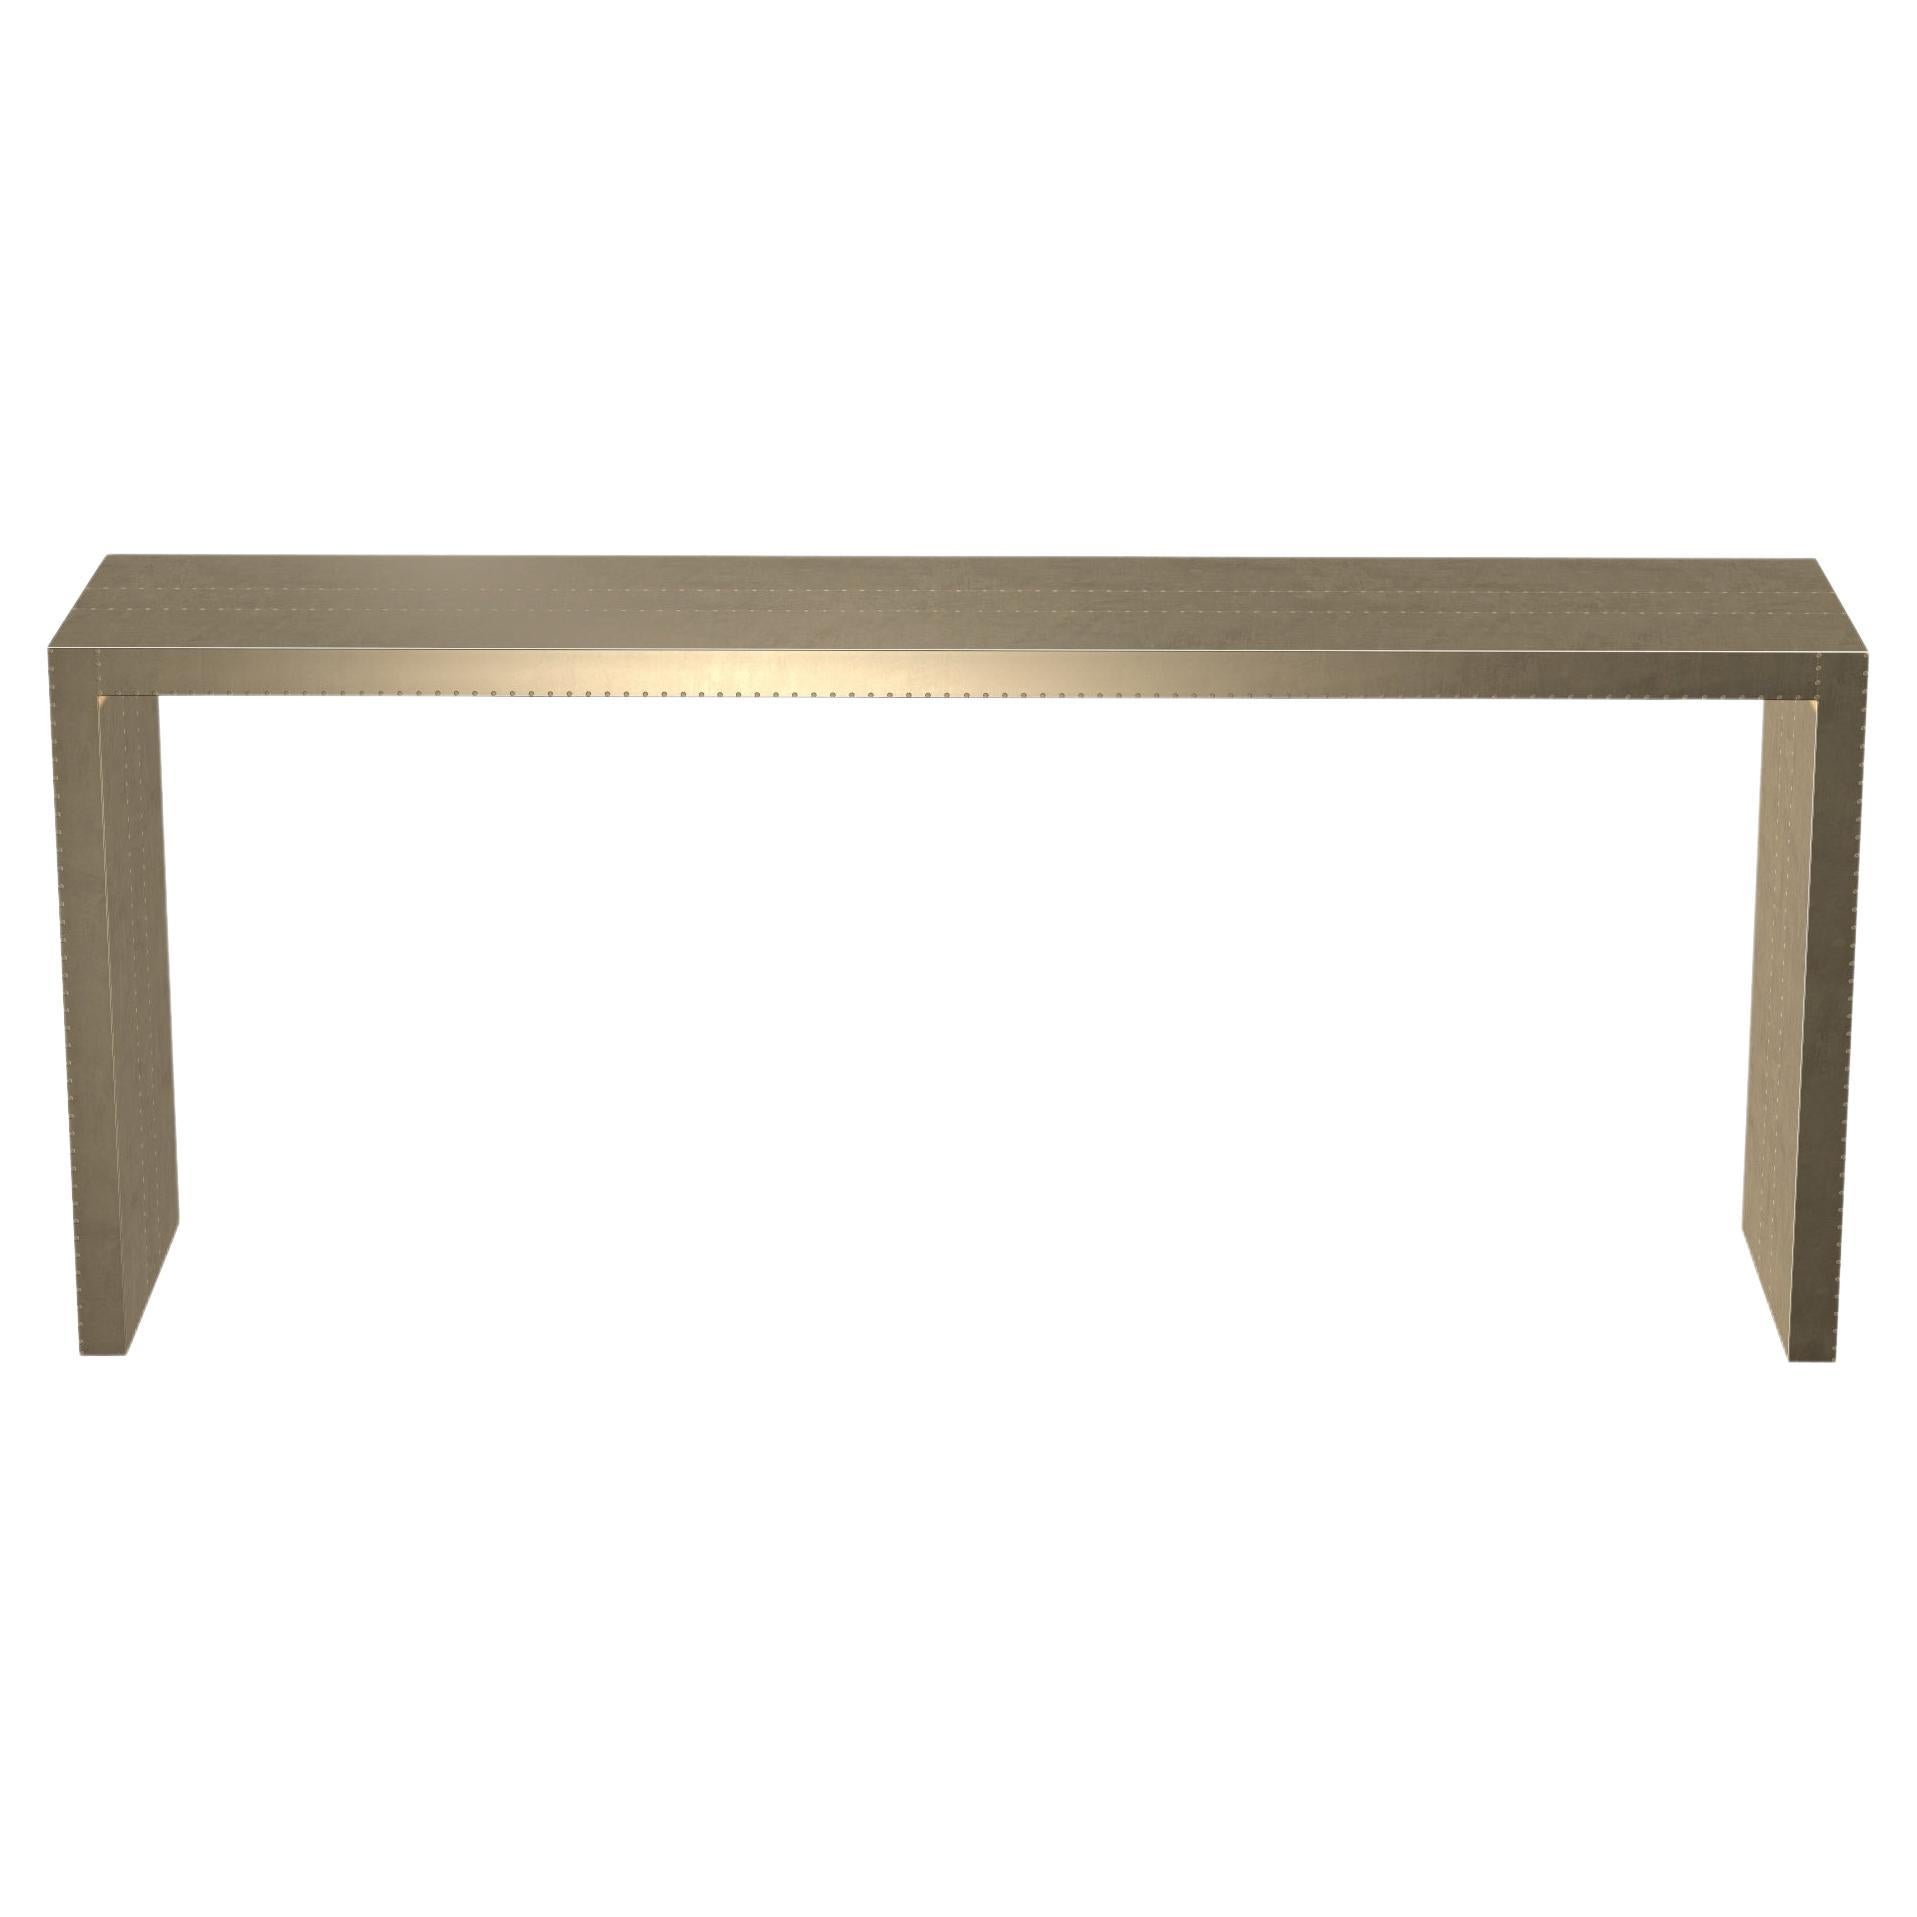 Art Deco Industrial and Work Tables Rectangular Console in Smooth Brass  For Sale